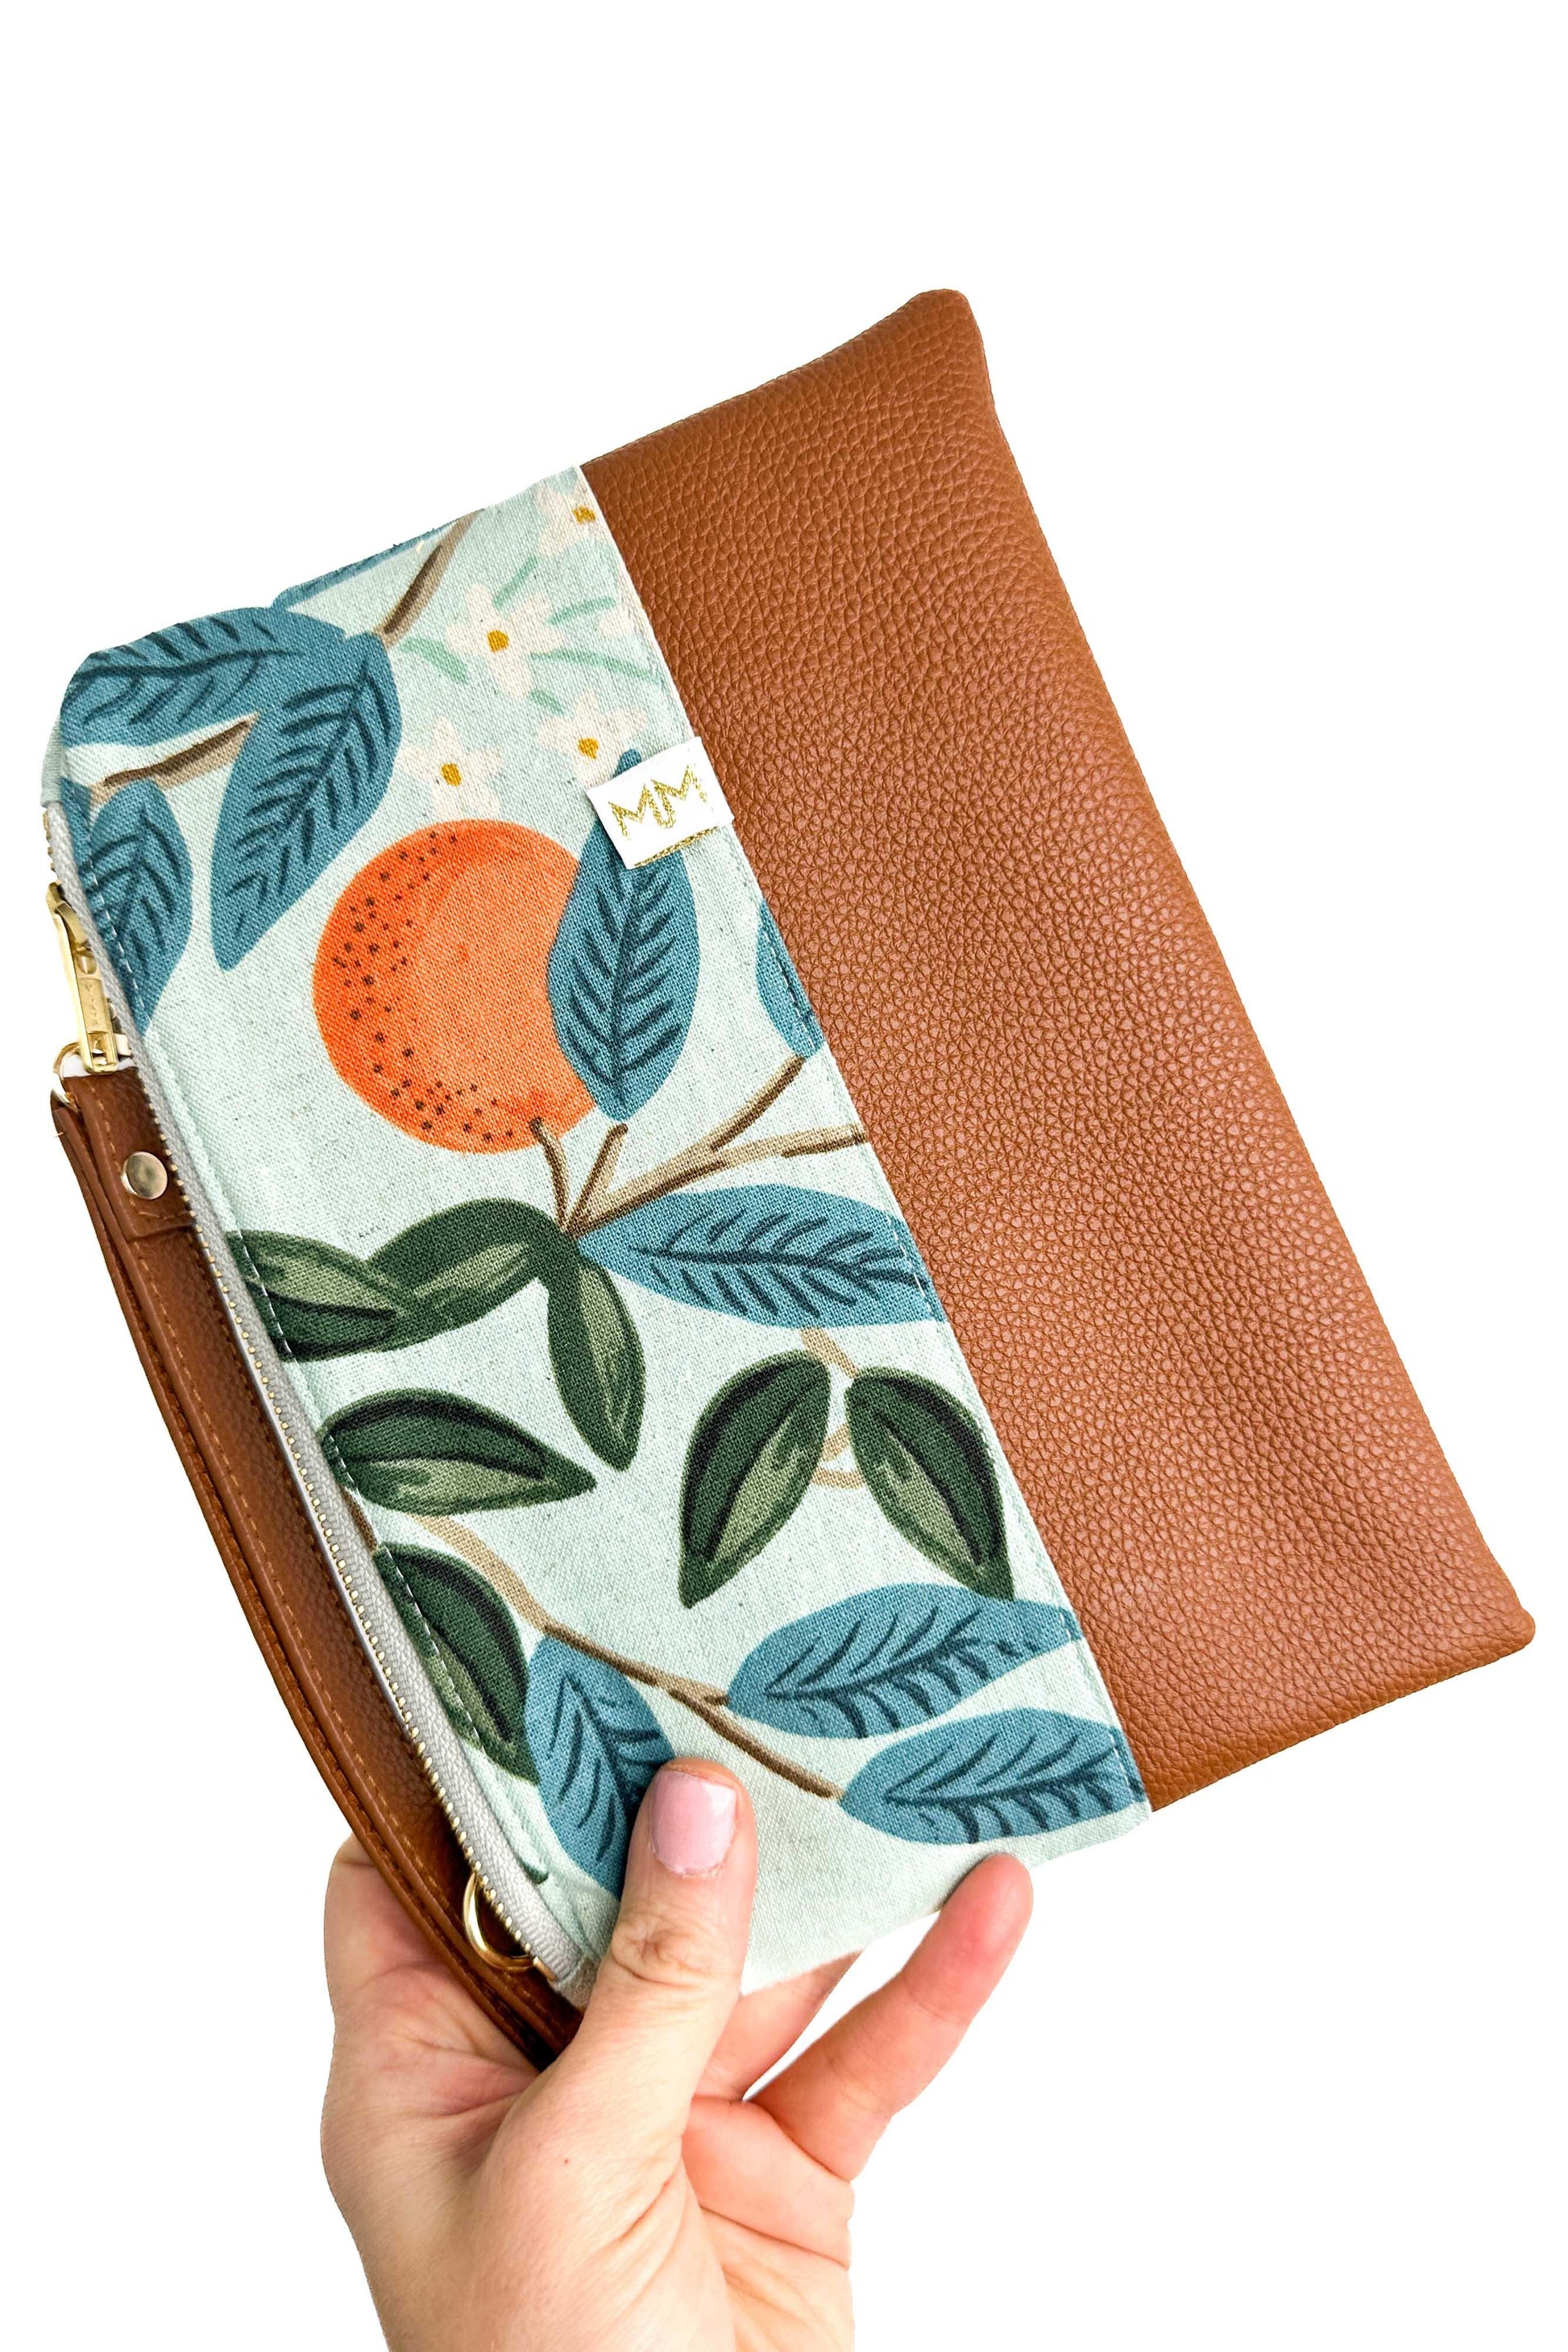 Citrus Grove Light Convertible Crossbody Wristlet+ with Compartments READY TO SHIP - Modern Makerie